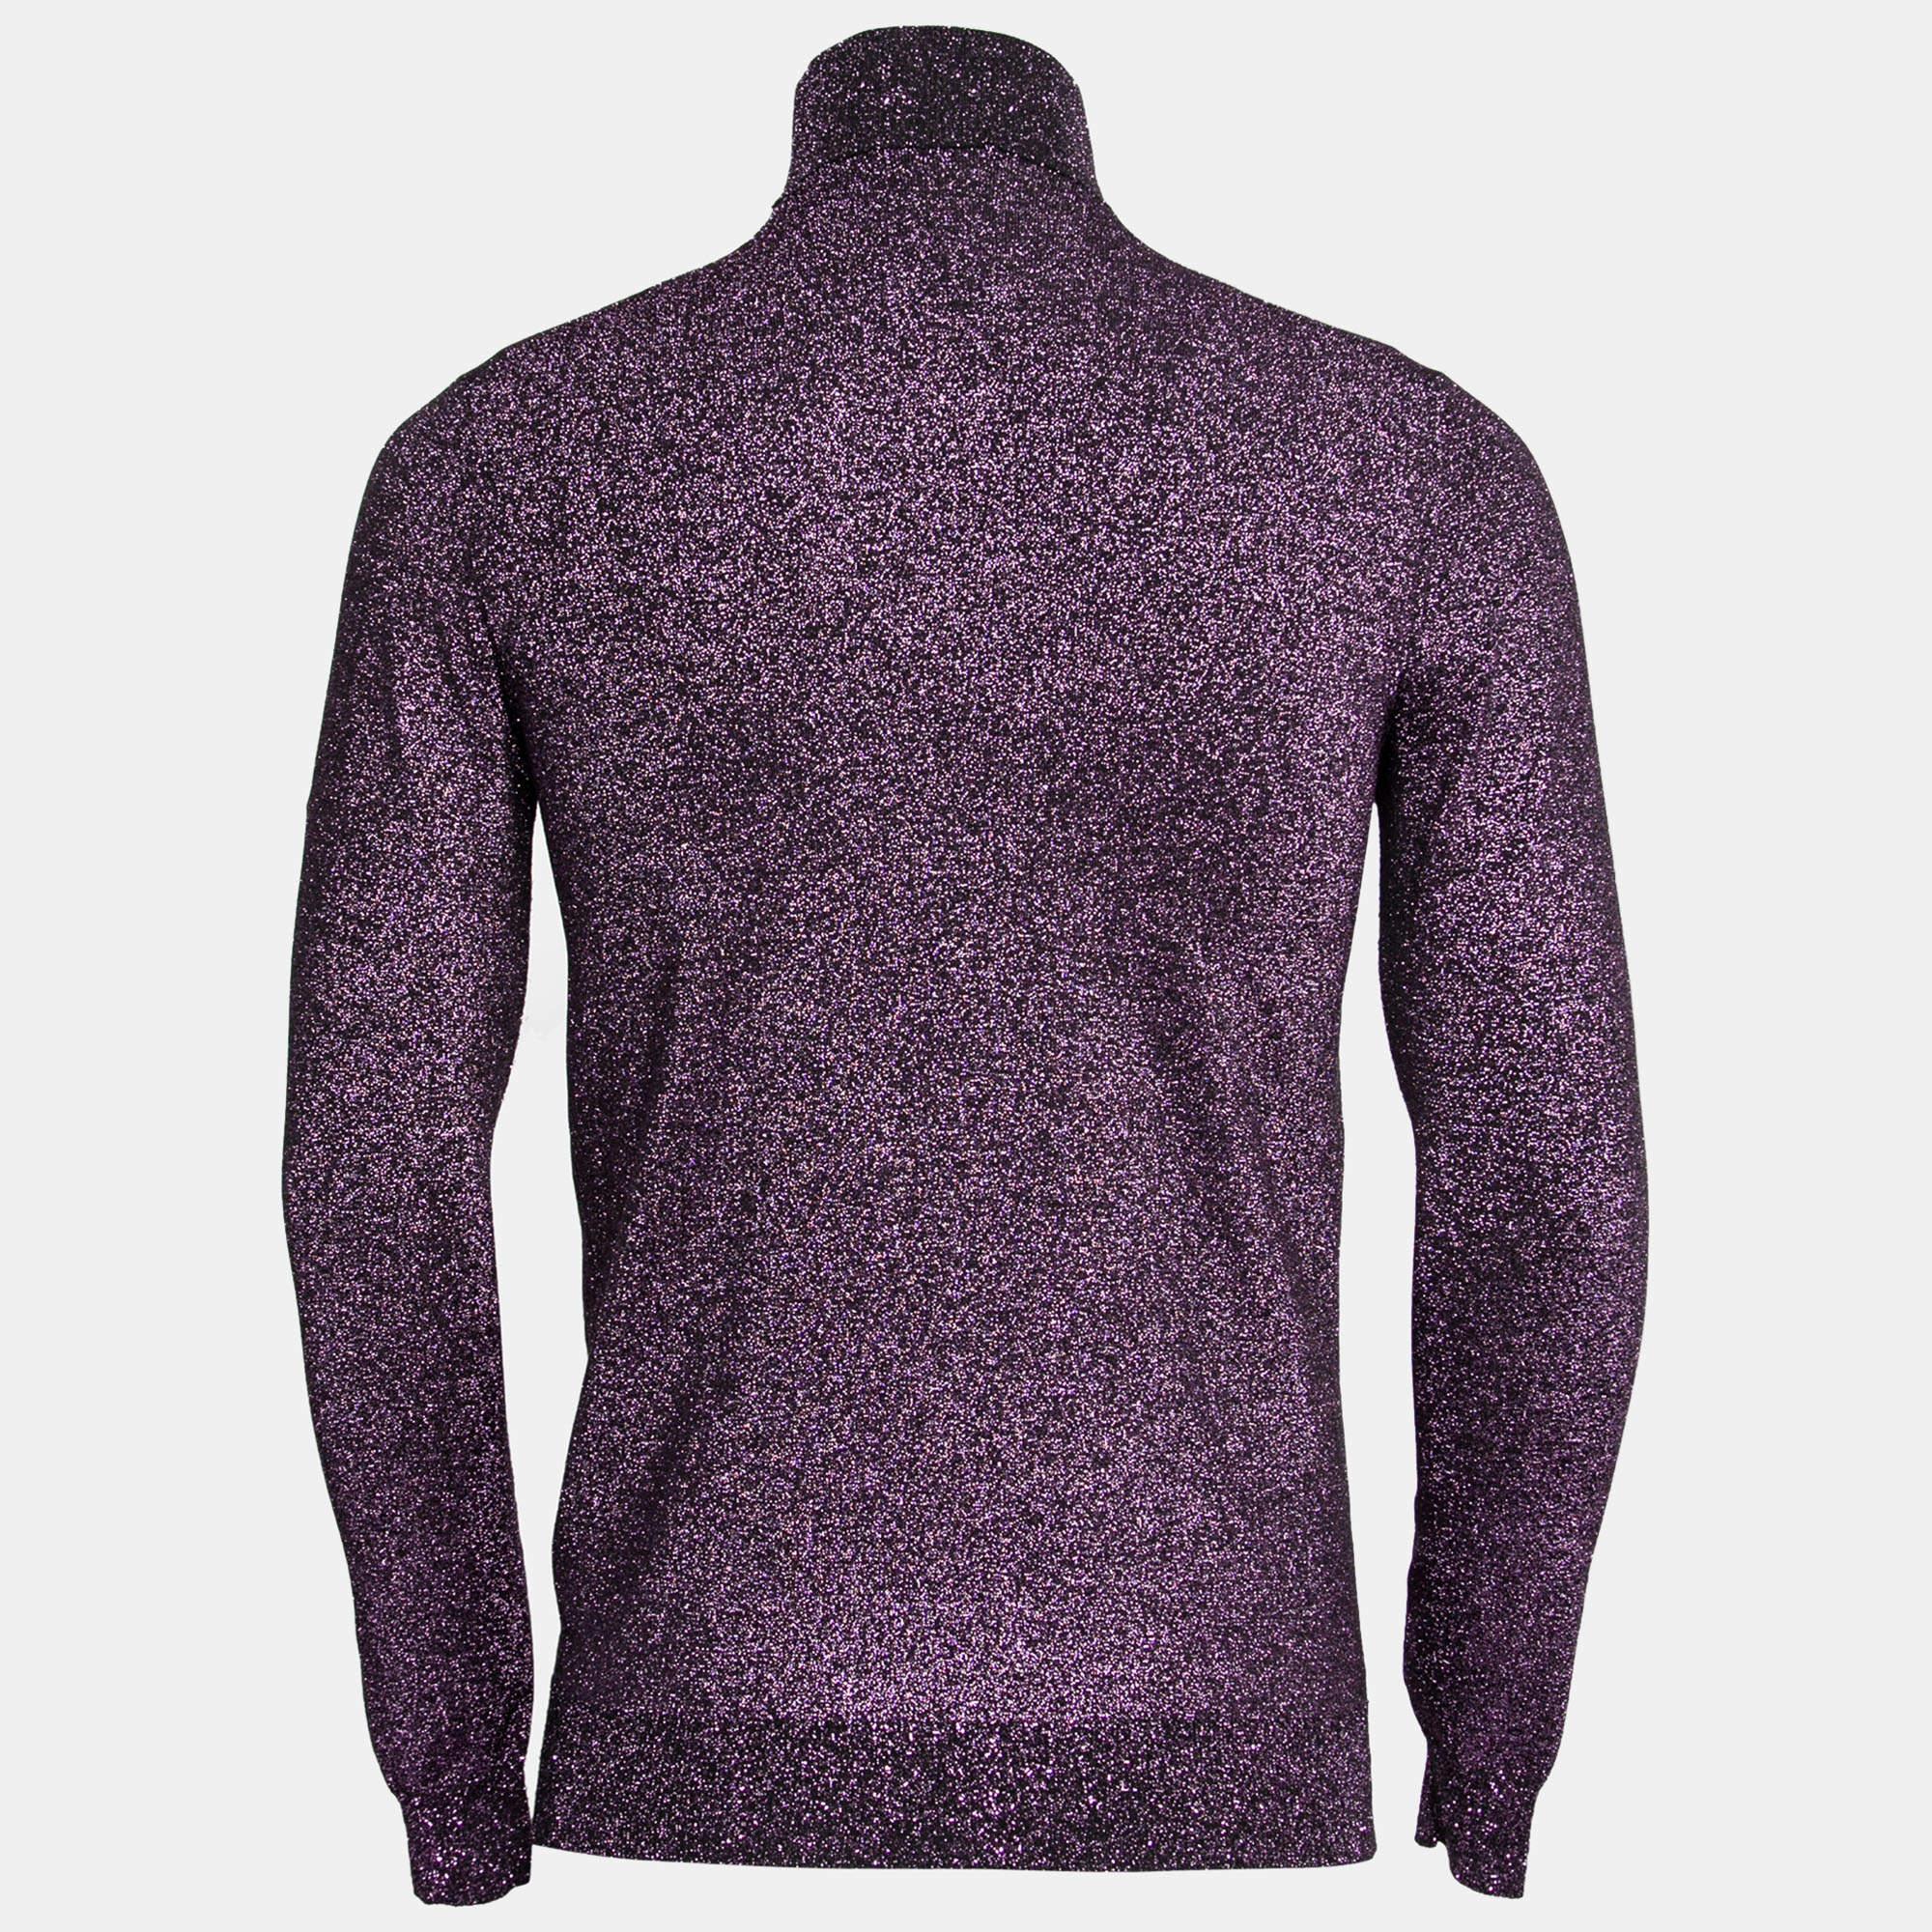 An ideal pick for the cold weather, this Prada sweater is an elevated and modern choice. It has been crafted using soft fabrics in purple shade then finished off with a turtle neck and long sleeves.

